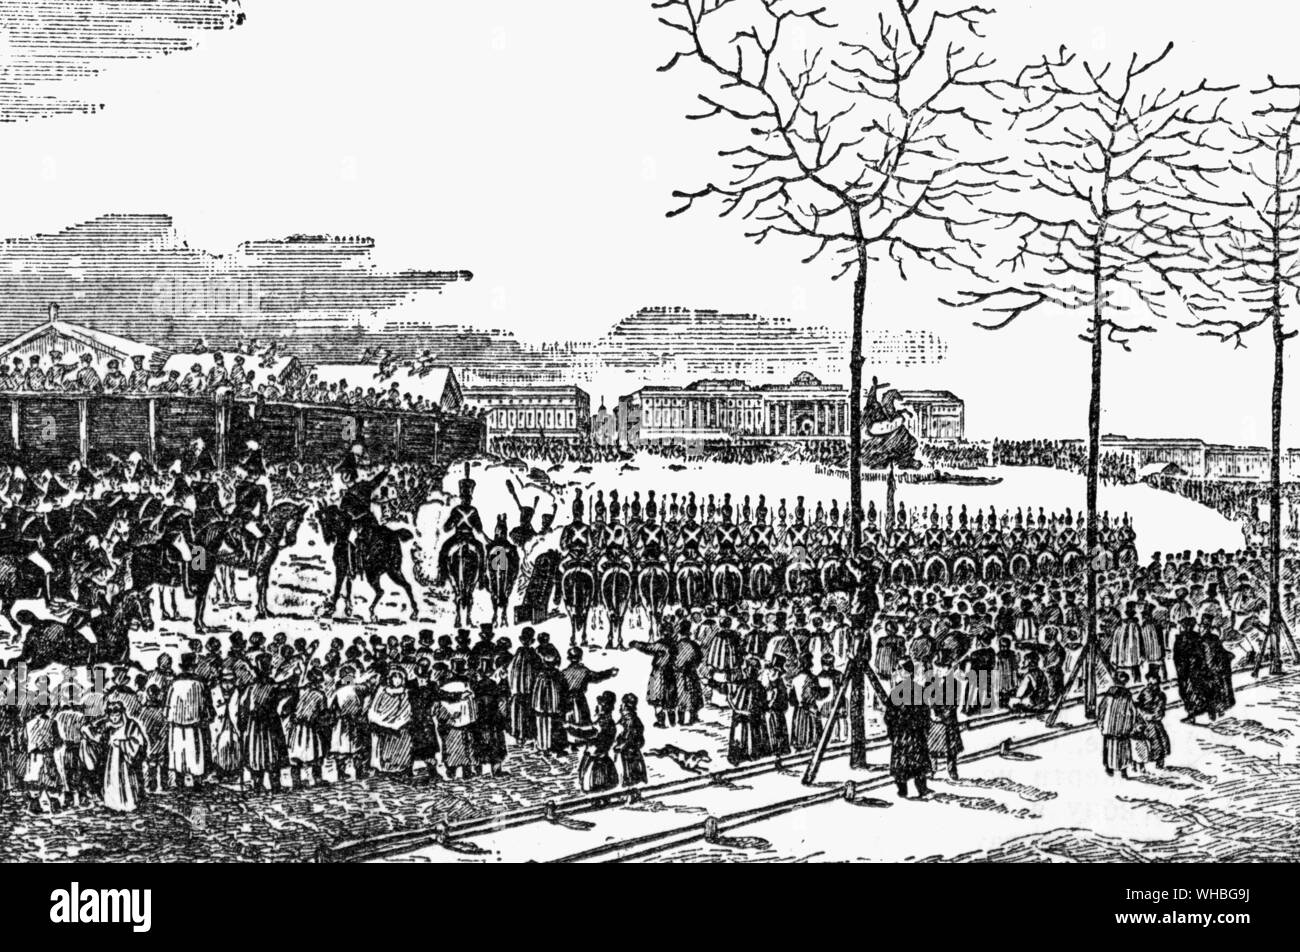 An engraving of Senate Square - 'Sire,' said General Toll to Nicholas I, 'sweep the square with gunfire or abdicate.'. Stock Photo